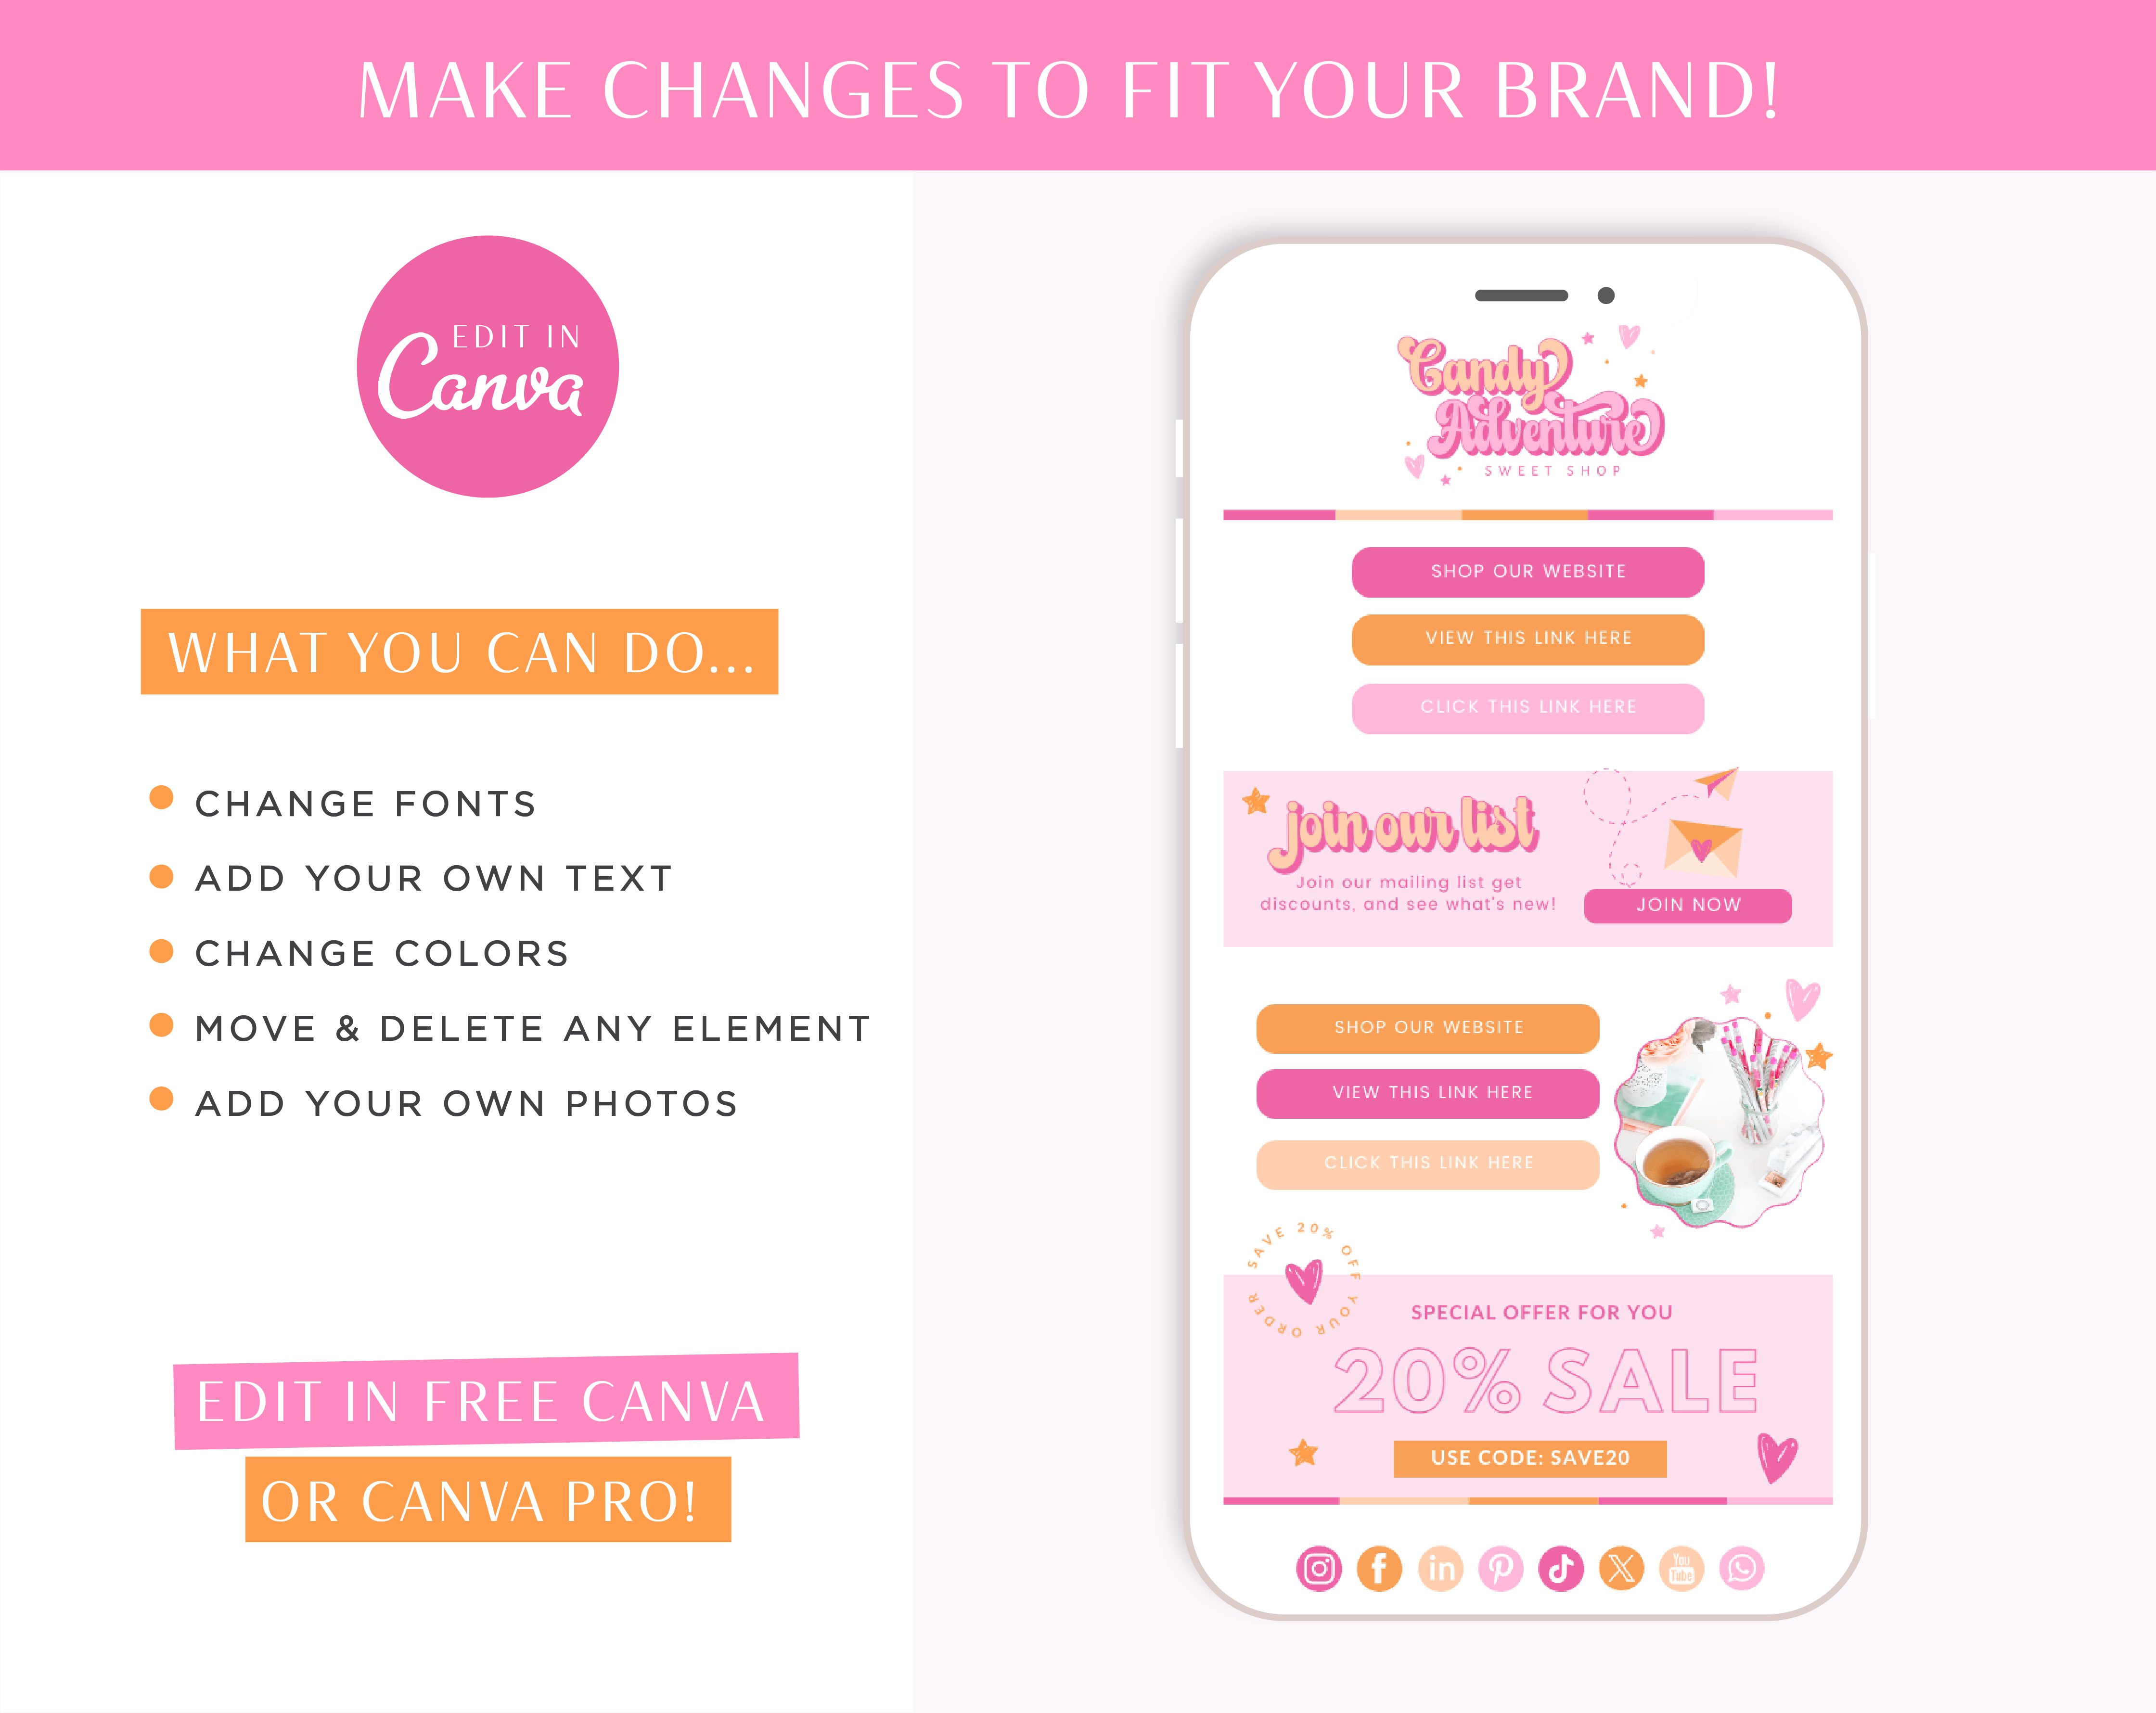 Pink Link in Bio Website Template for Canva, One-page website design for Instagram Profile with pink, orange, and sparkling stars and hearts